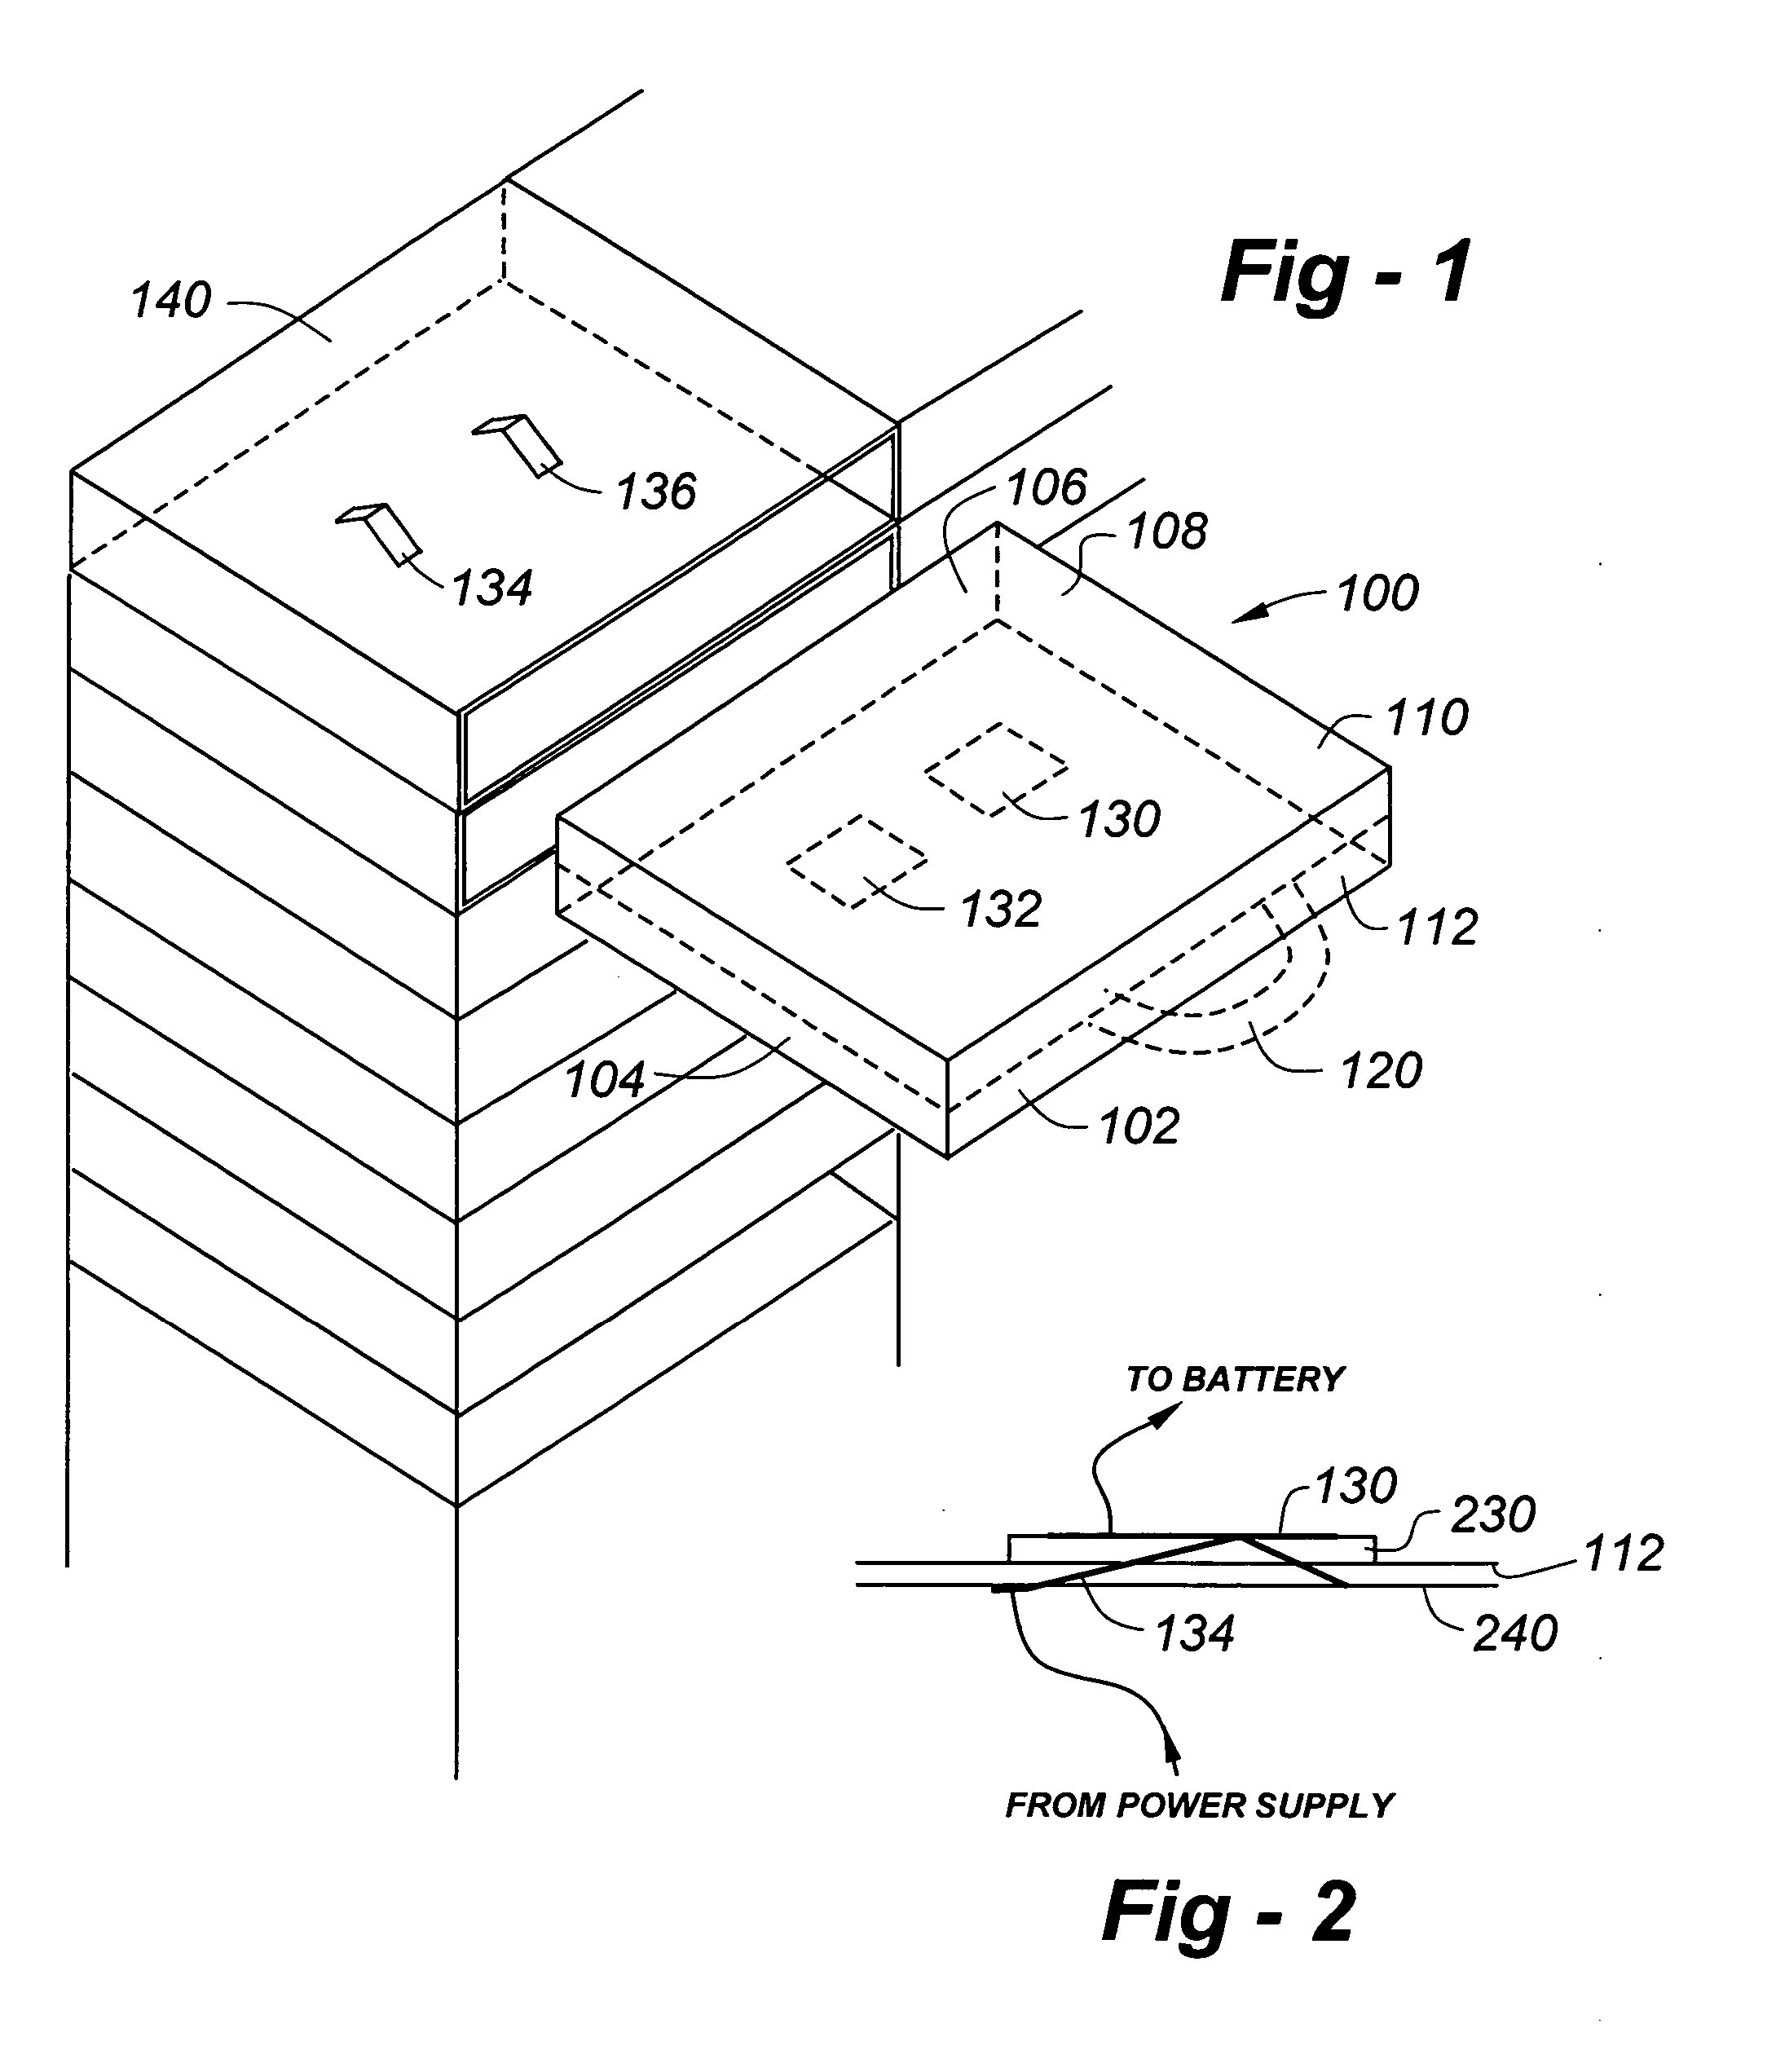 Recharging apparatus for portable electronic devices